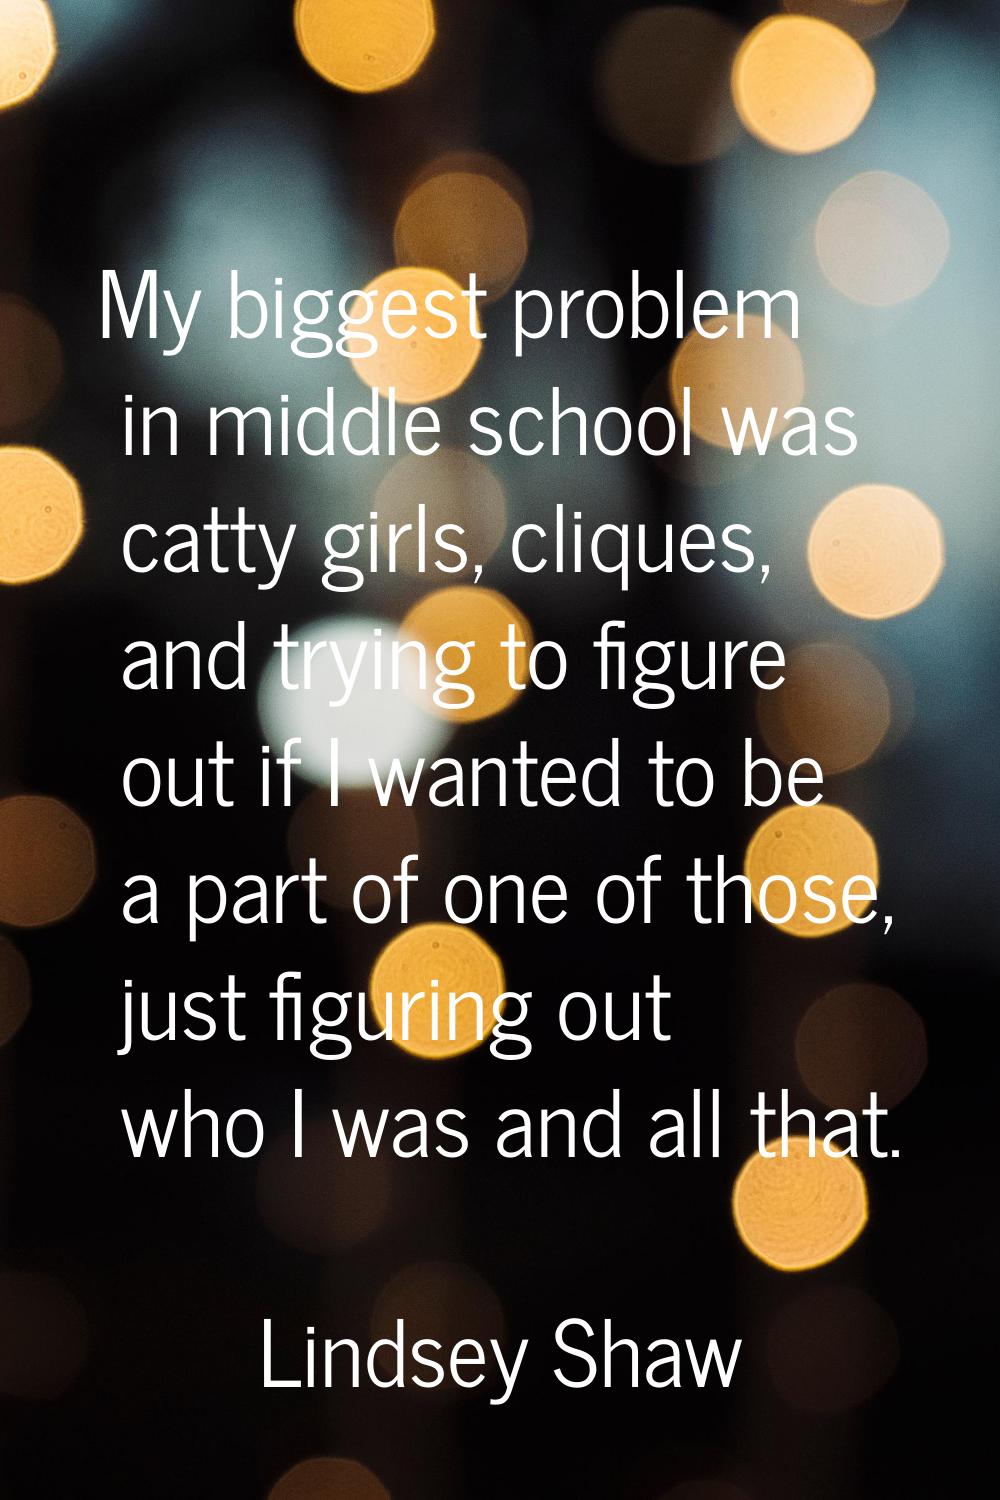 My biggest problem in middle school was catty girls, cliques, and trying to figure out if I wanted 